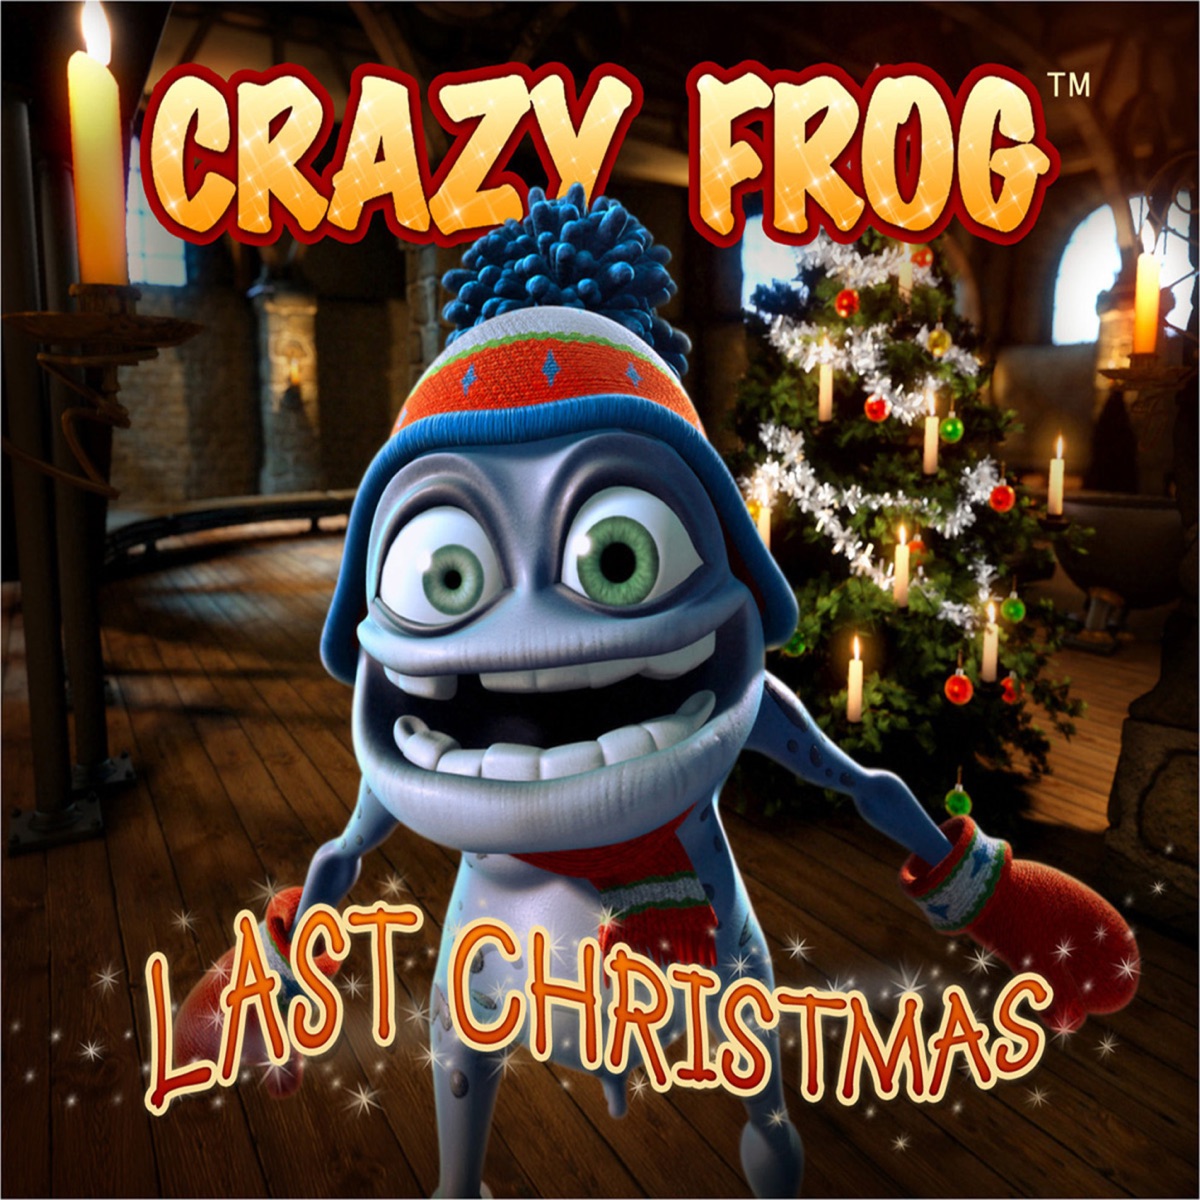 Last Christmas - EP by Crazy Frog on Apple Music